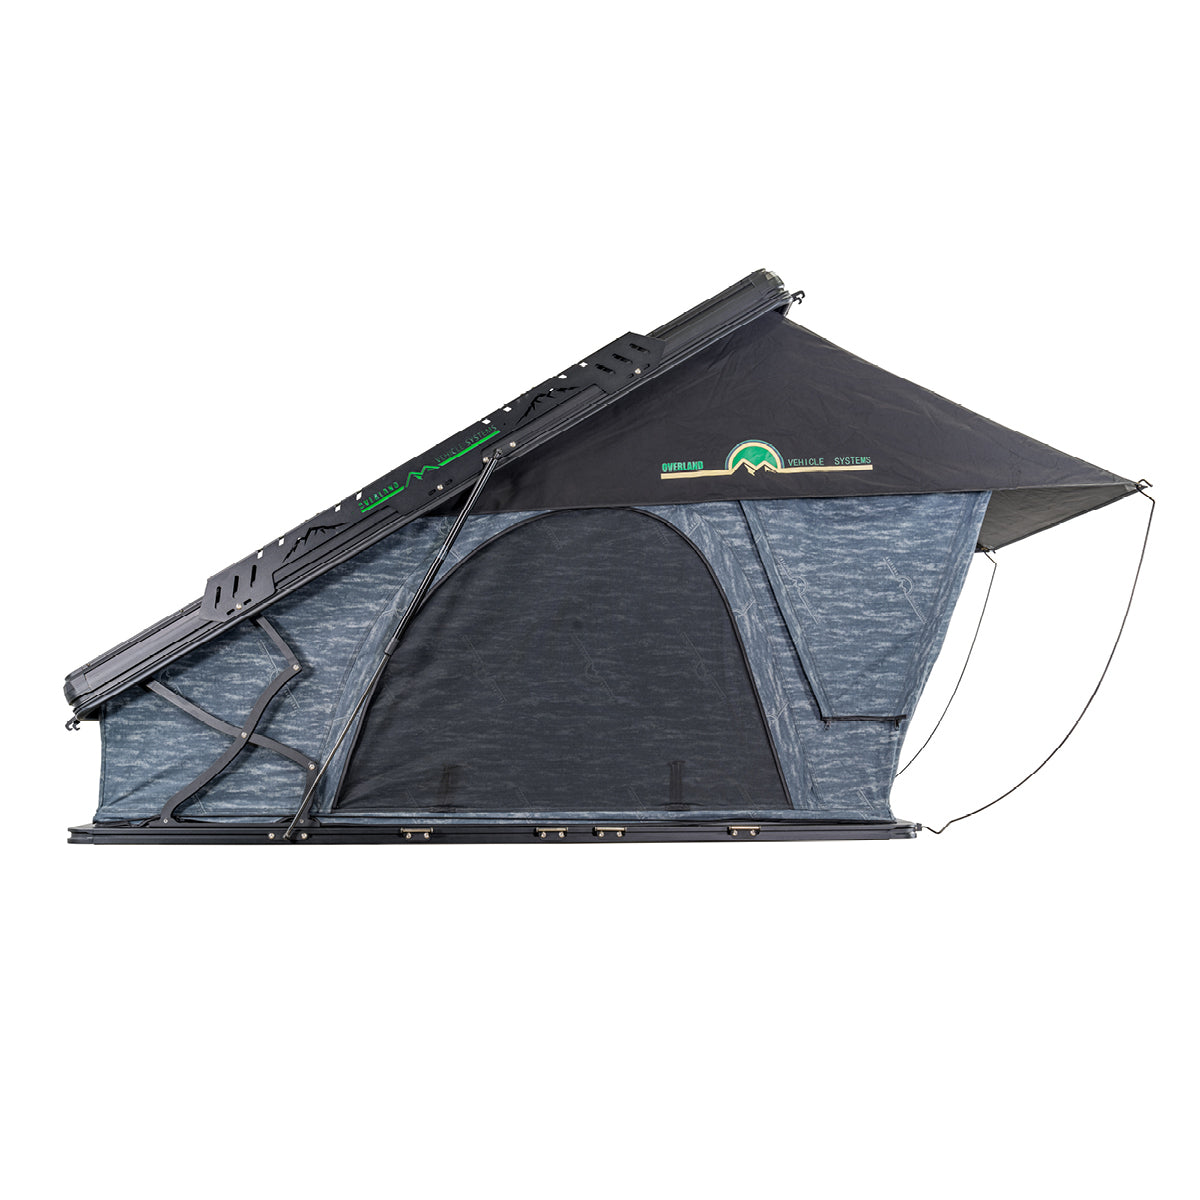 OVS XD Lohtse Clamshell Aluminum Roof Top Tent 2 Person Grey Body & Black Rainfly 18589902